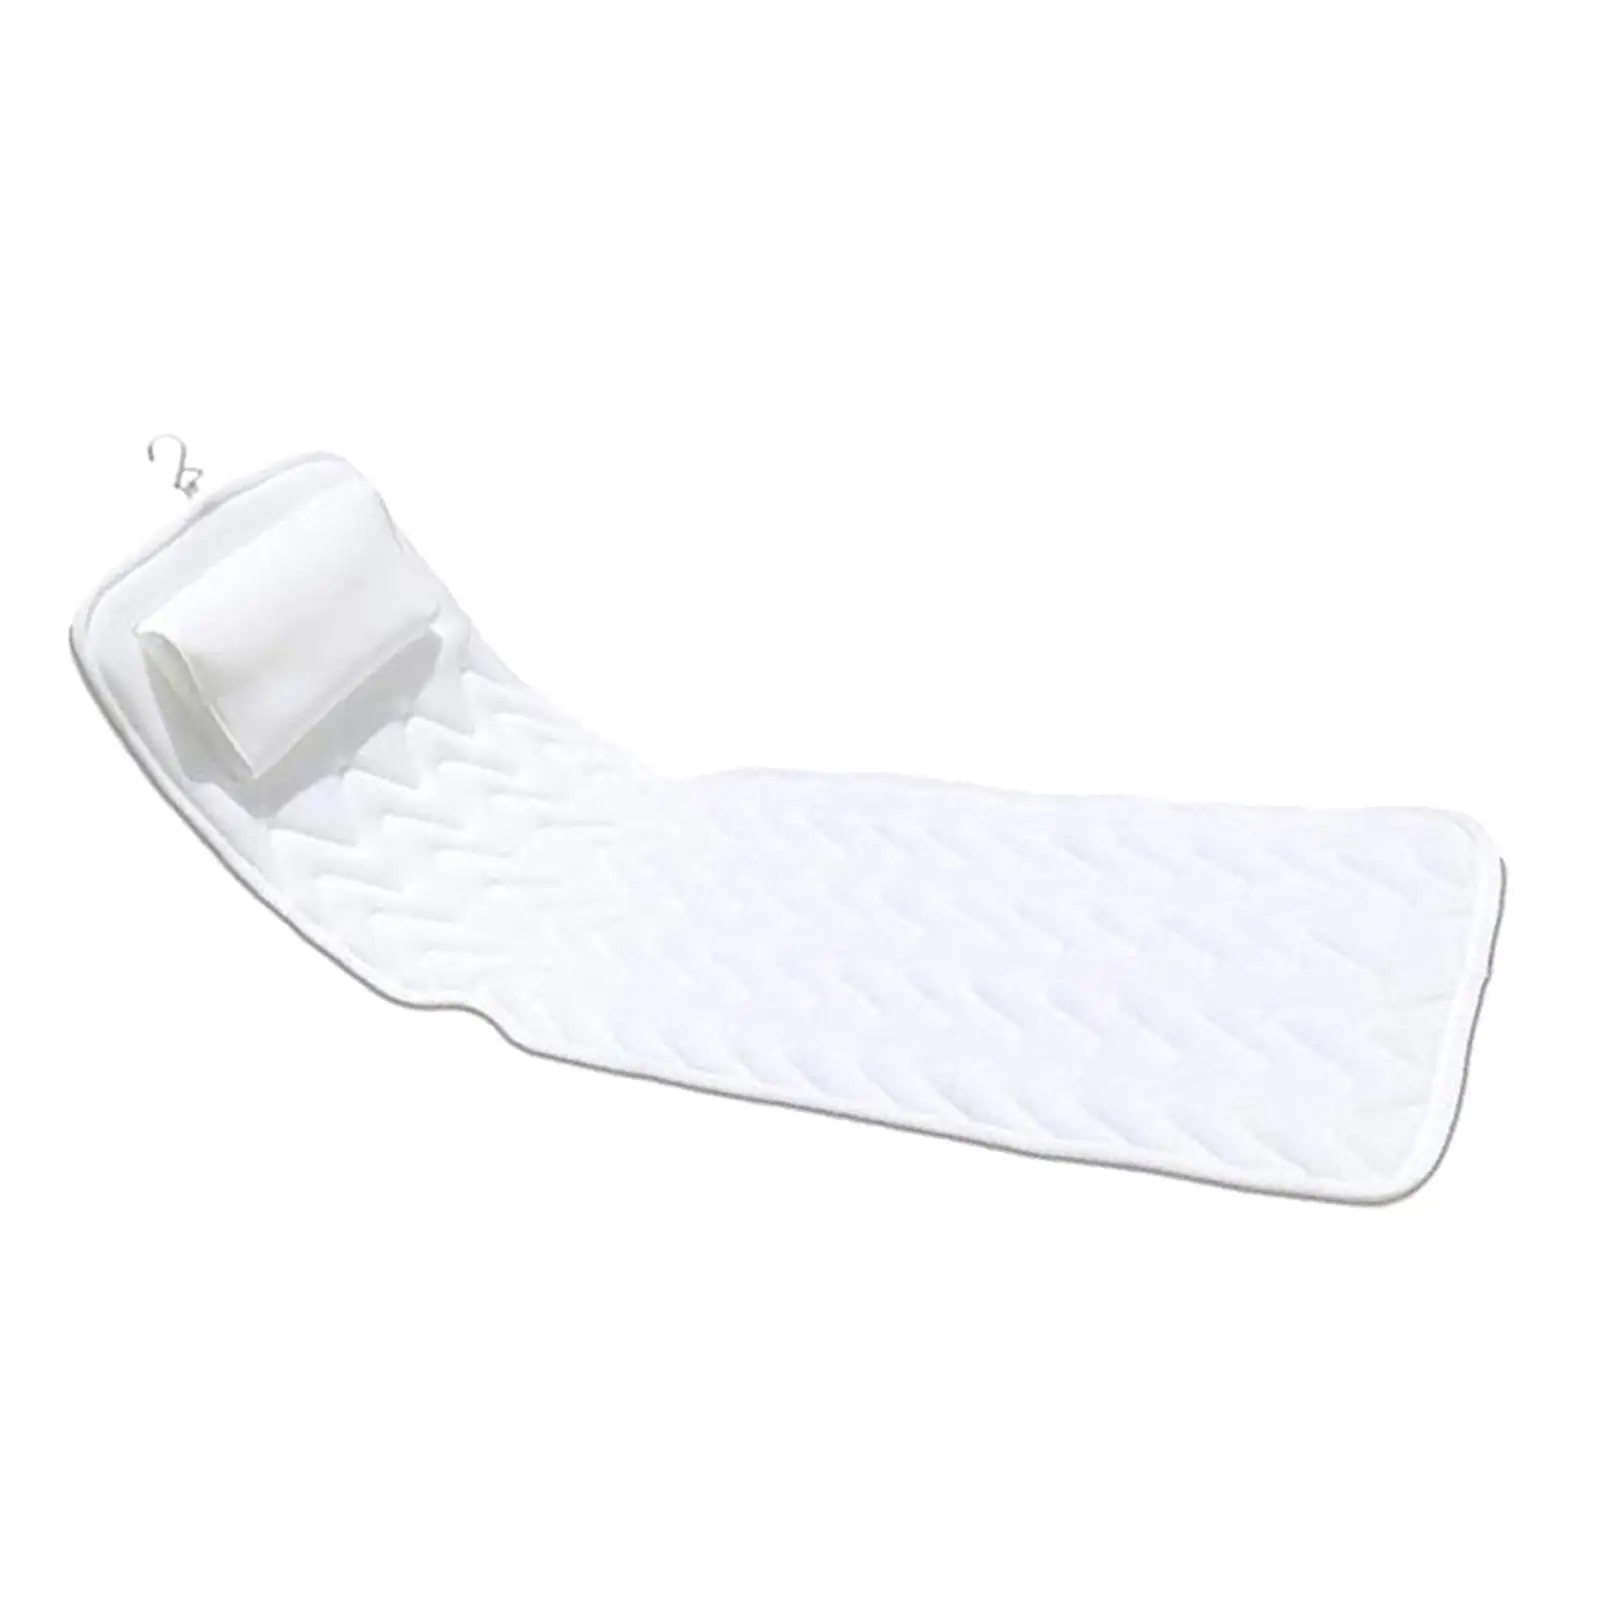 Full Body Bath Pillow,Non Slip Bath Pillows for Tub Neck and Back Support